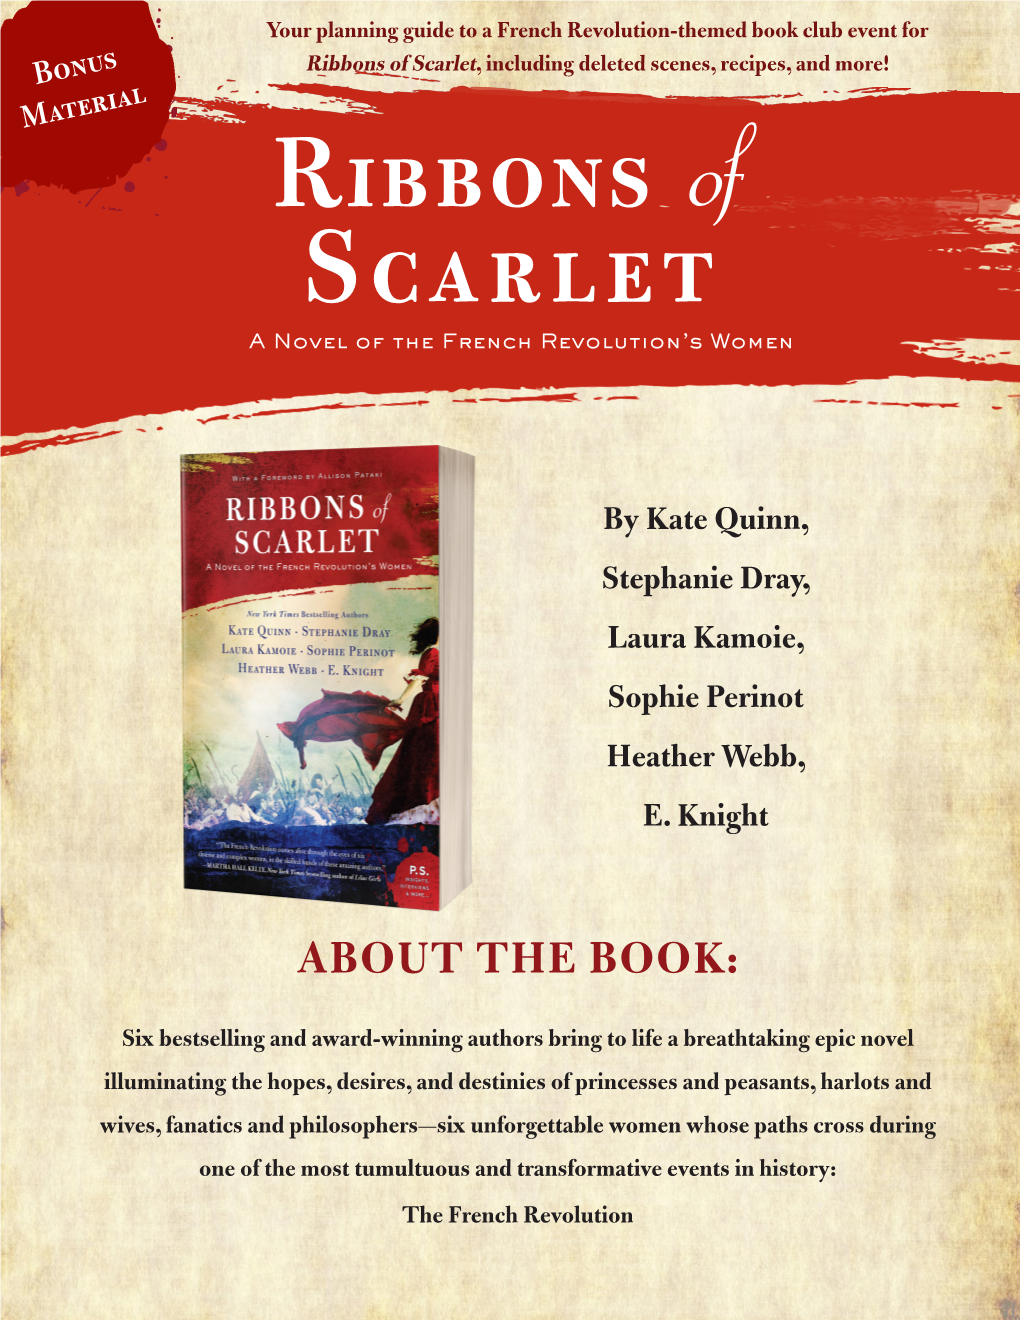 Ribbons of Scarlet, Including Deleted Scenes, Recipes, and More! Material Ribbons of Scarlet a Novel of the French Revolution’S Women